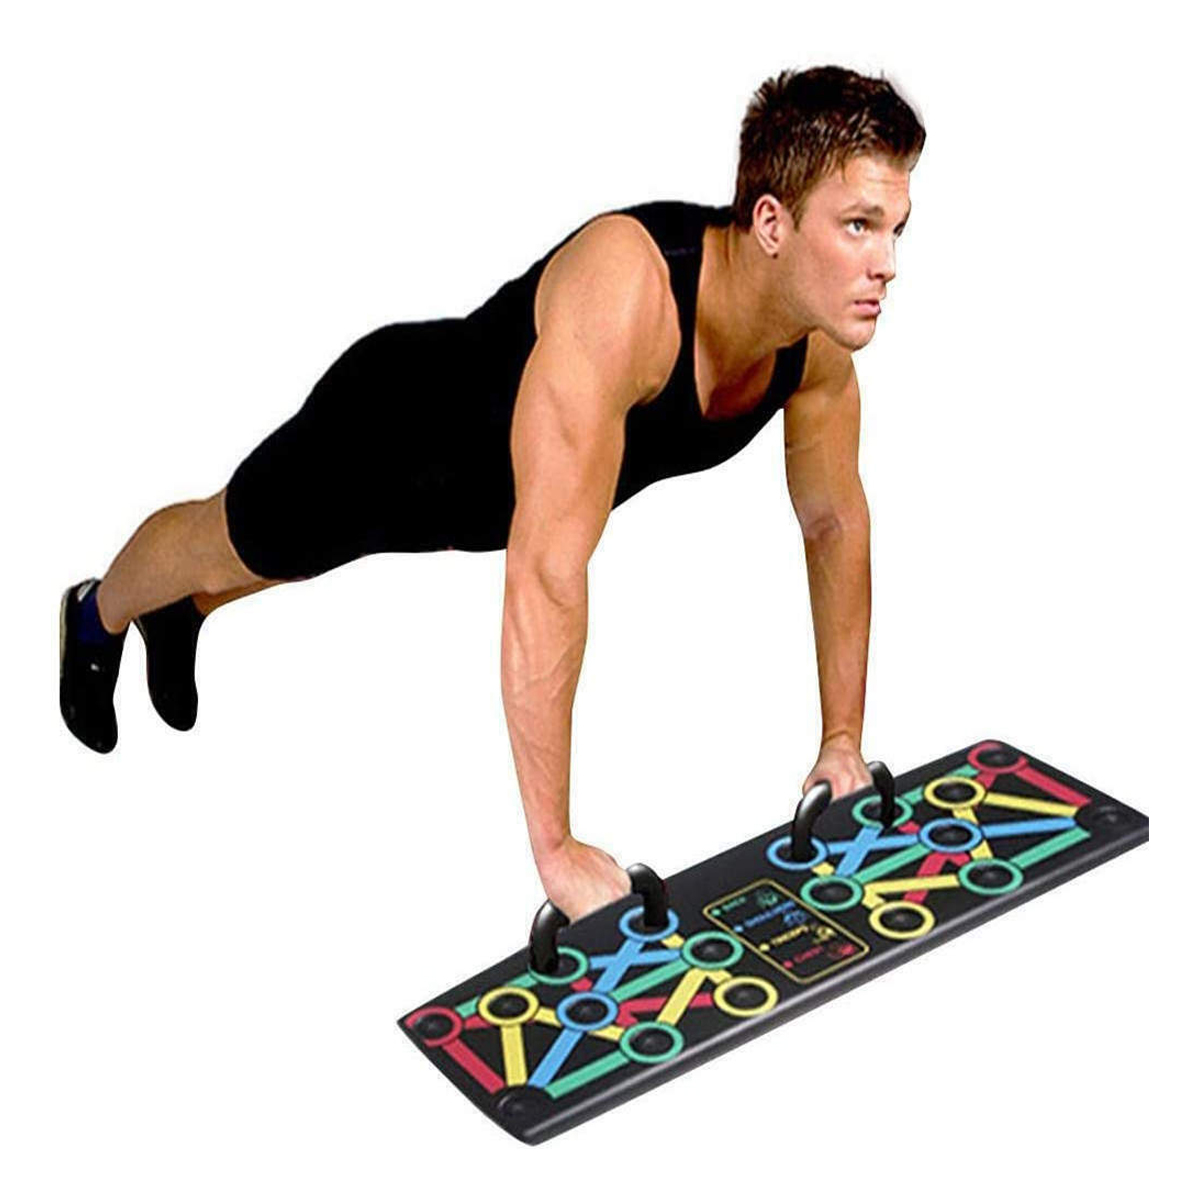 14-In-1-Foldable-Push-Up-Stand-Board-Home-Gym-Push-up-Chest-Muscle-Training-Fitness-Equipment-1667691-8